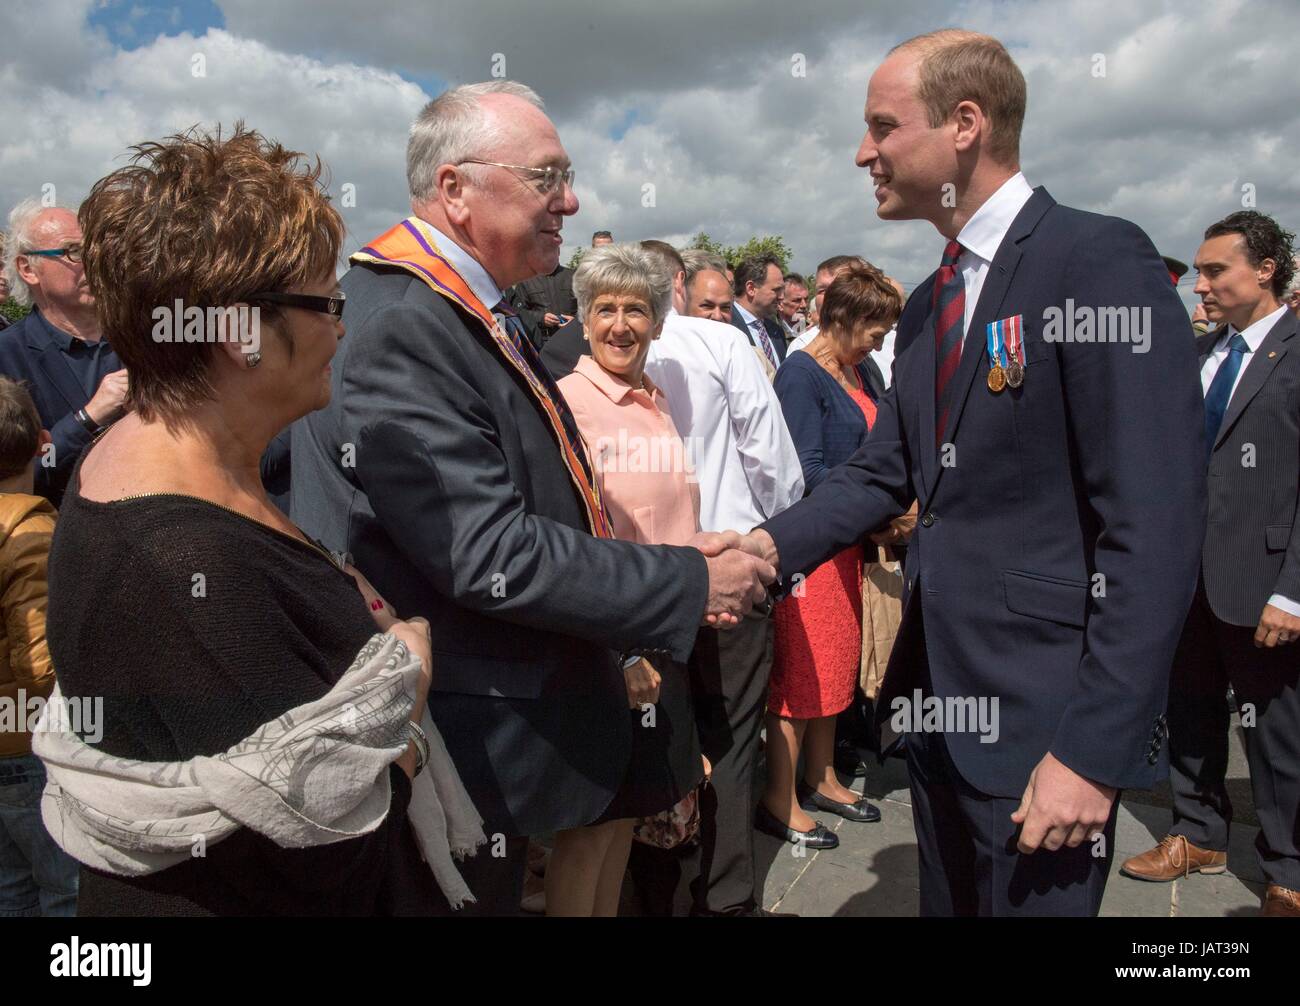 The Duke of Cambridge (right) meets the Grand Secretary of the Orange Order Reverend Mervyn Gibon following a ceremony at the Island of Ireland Peace Park in Messines, Belgium to commemorate Battle of Messines Ridge. Stock Photo